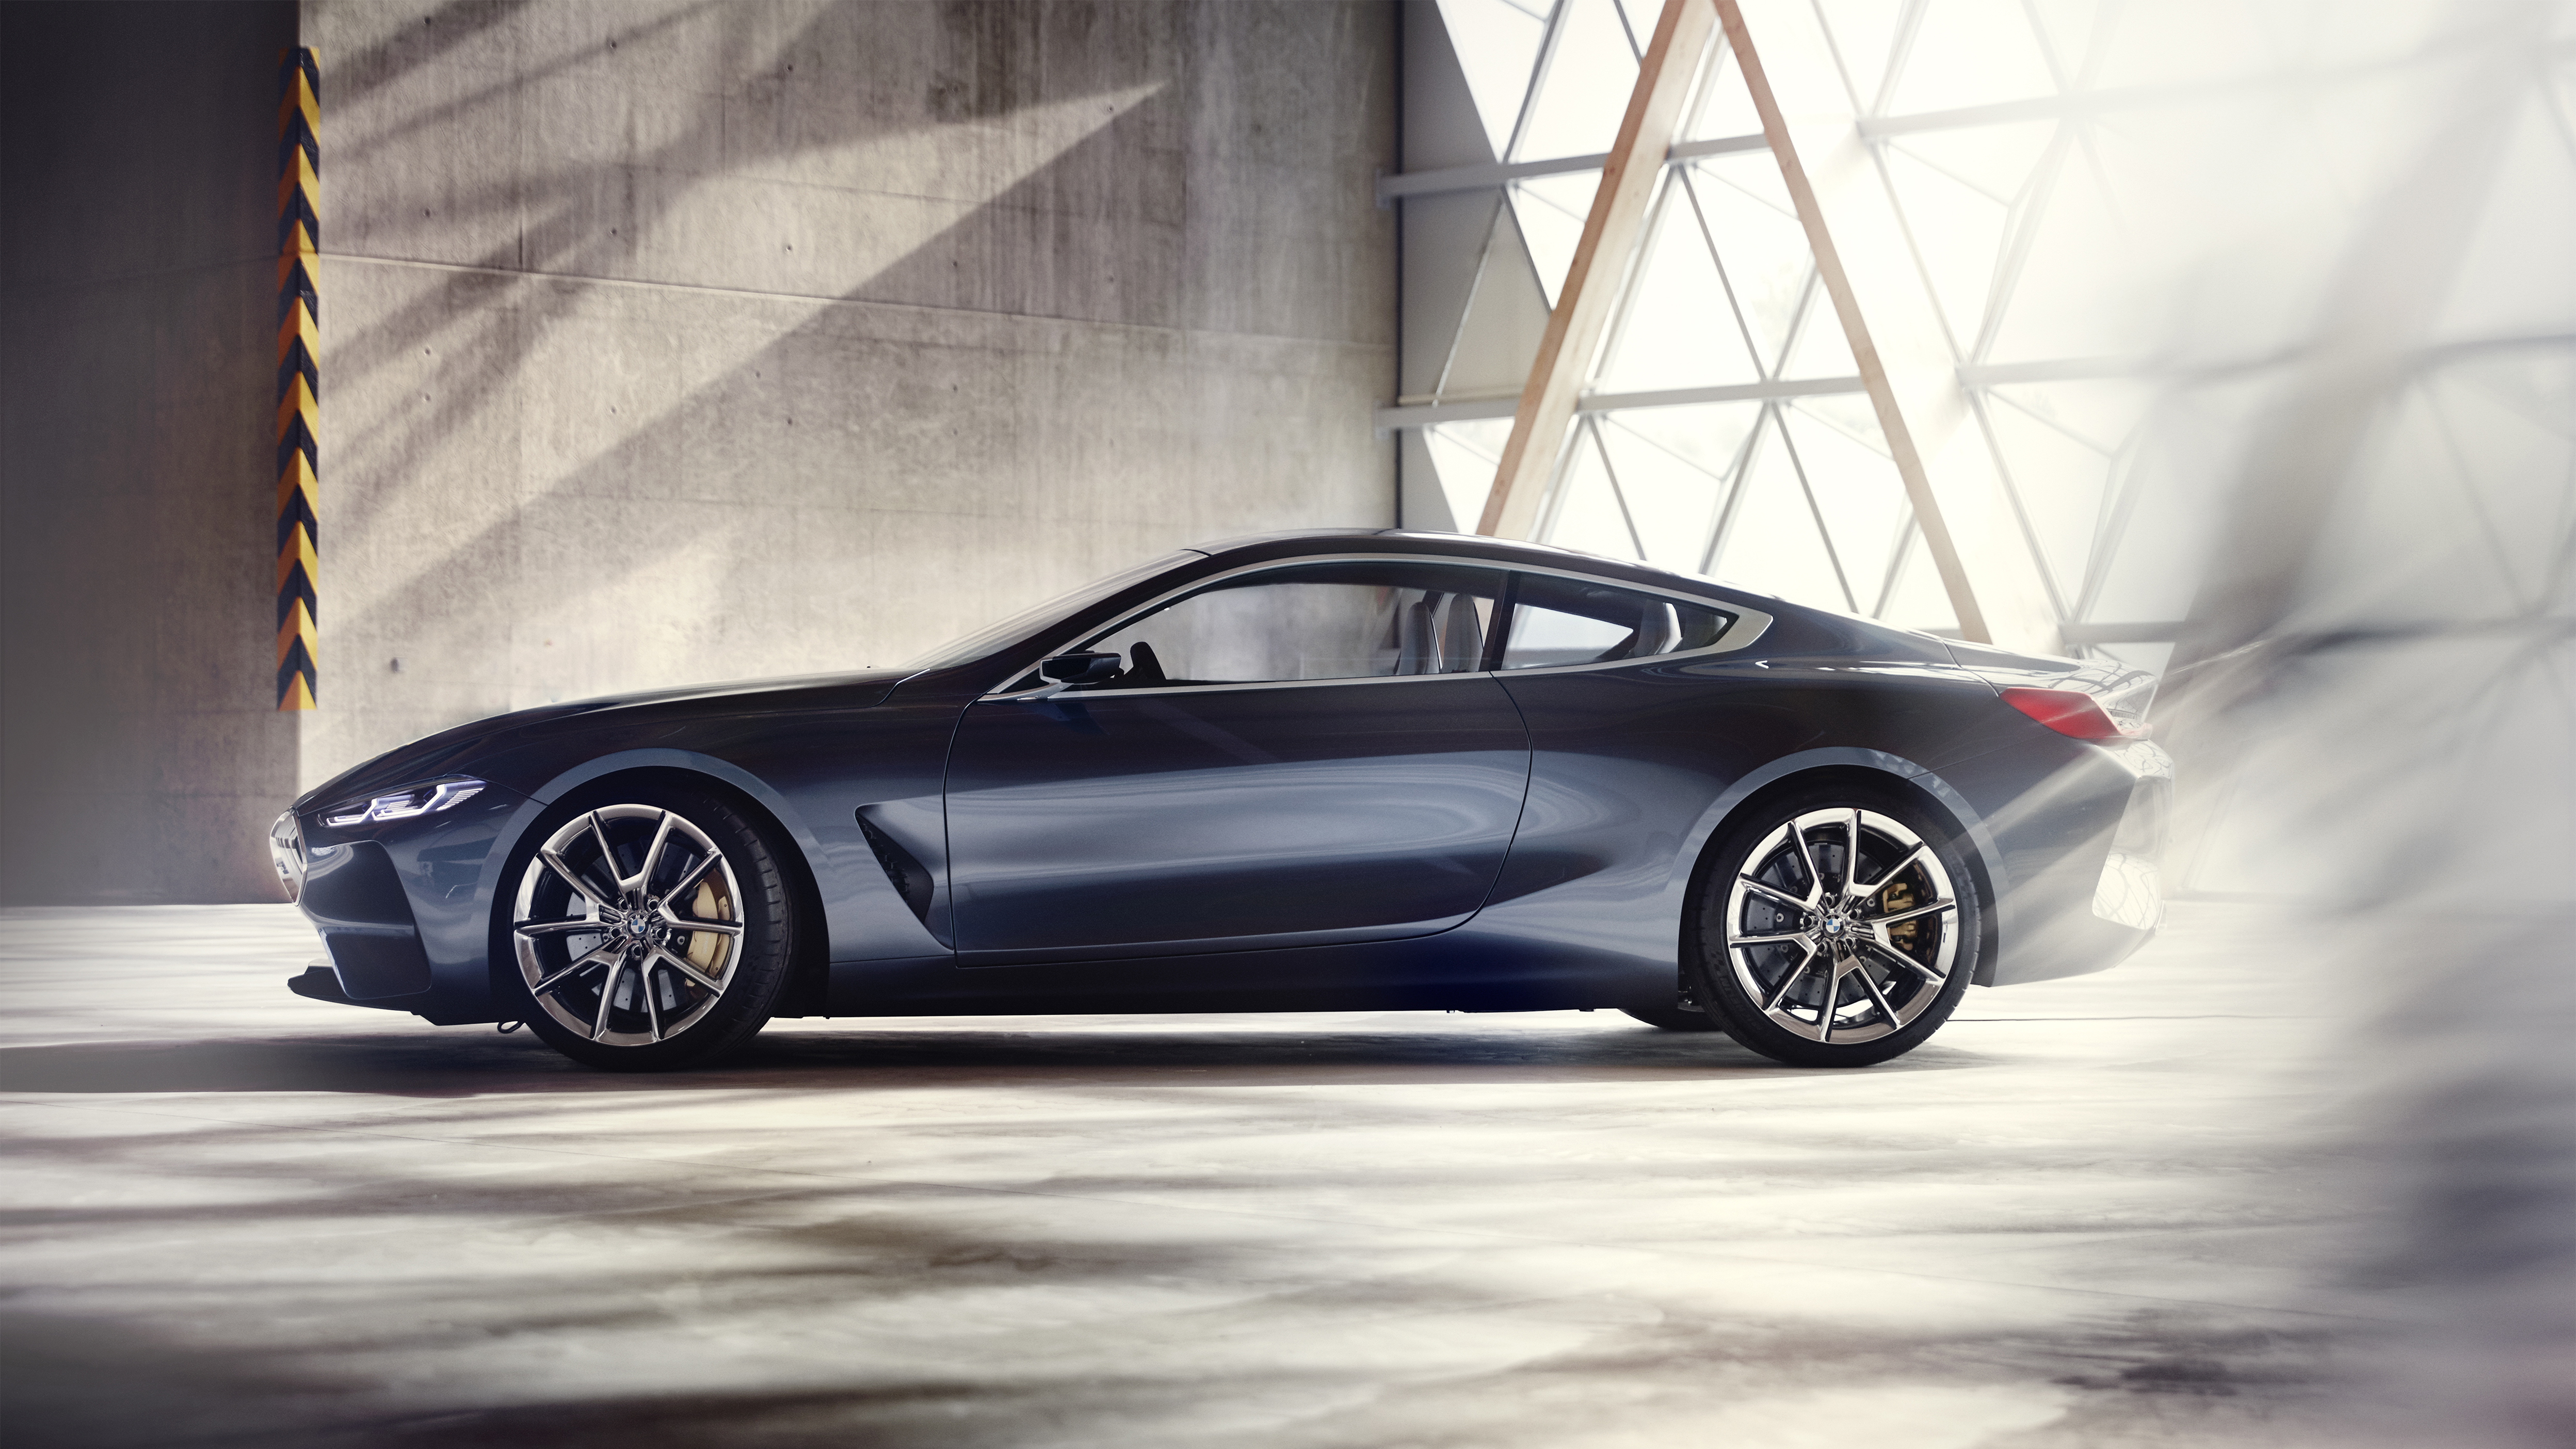 Vehicles BMW Concept 8 Series HD Wallpaper | Background Image